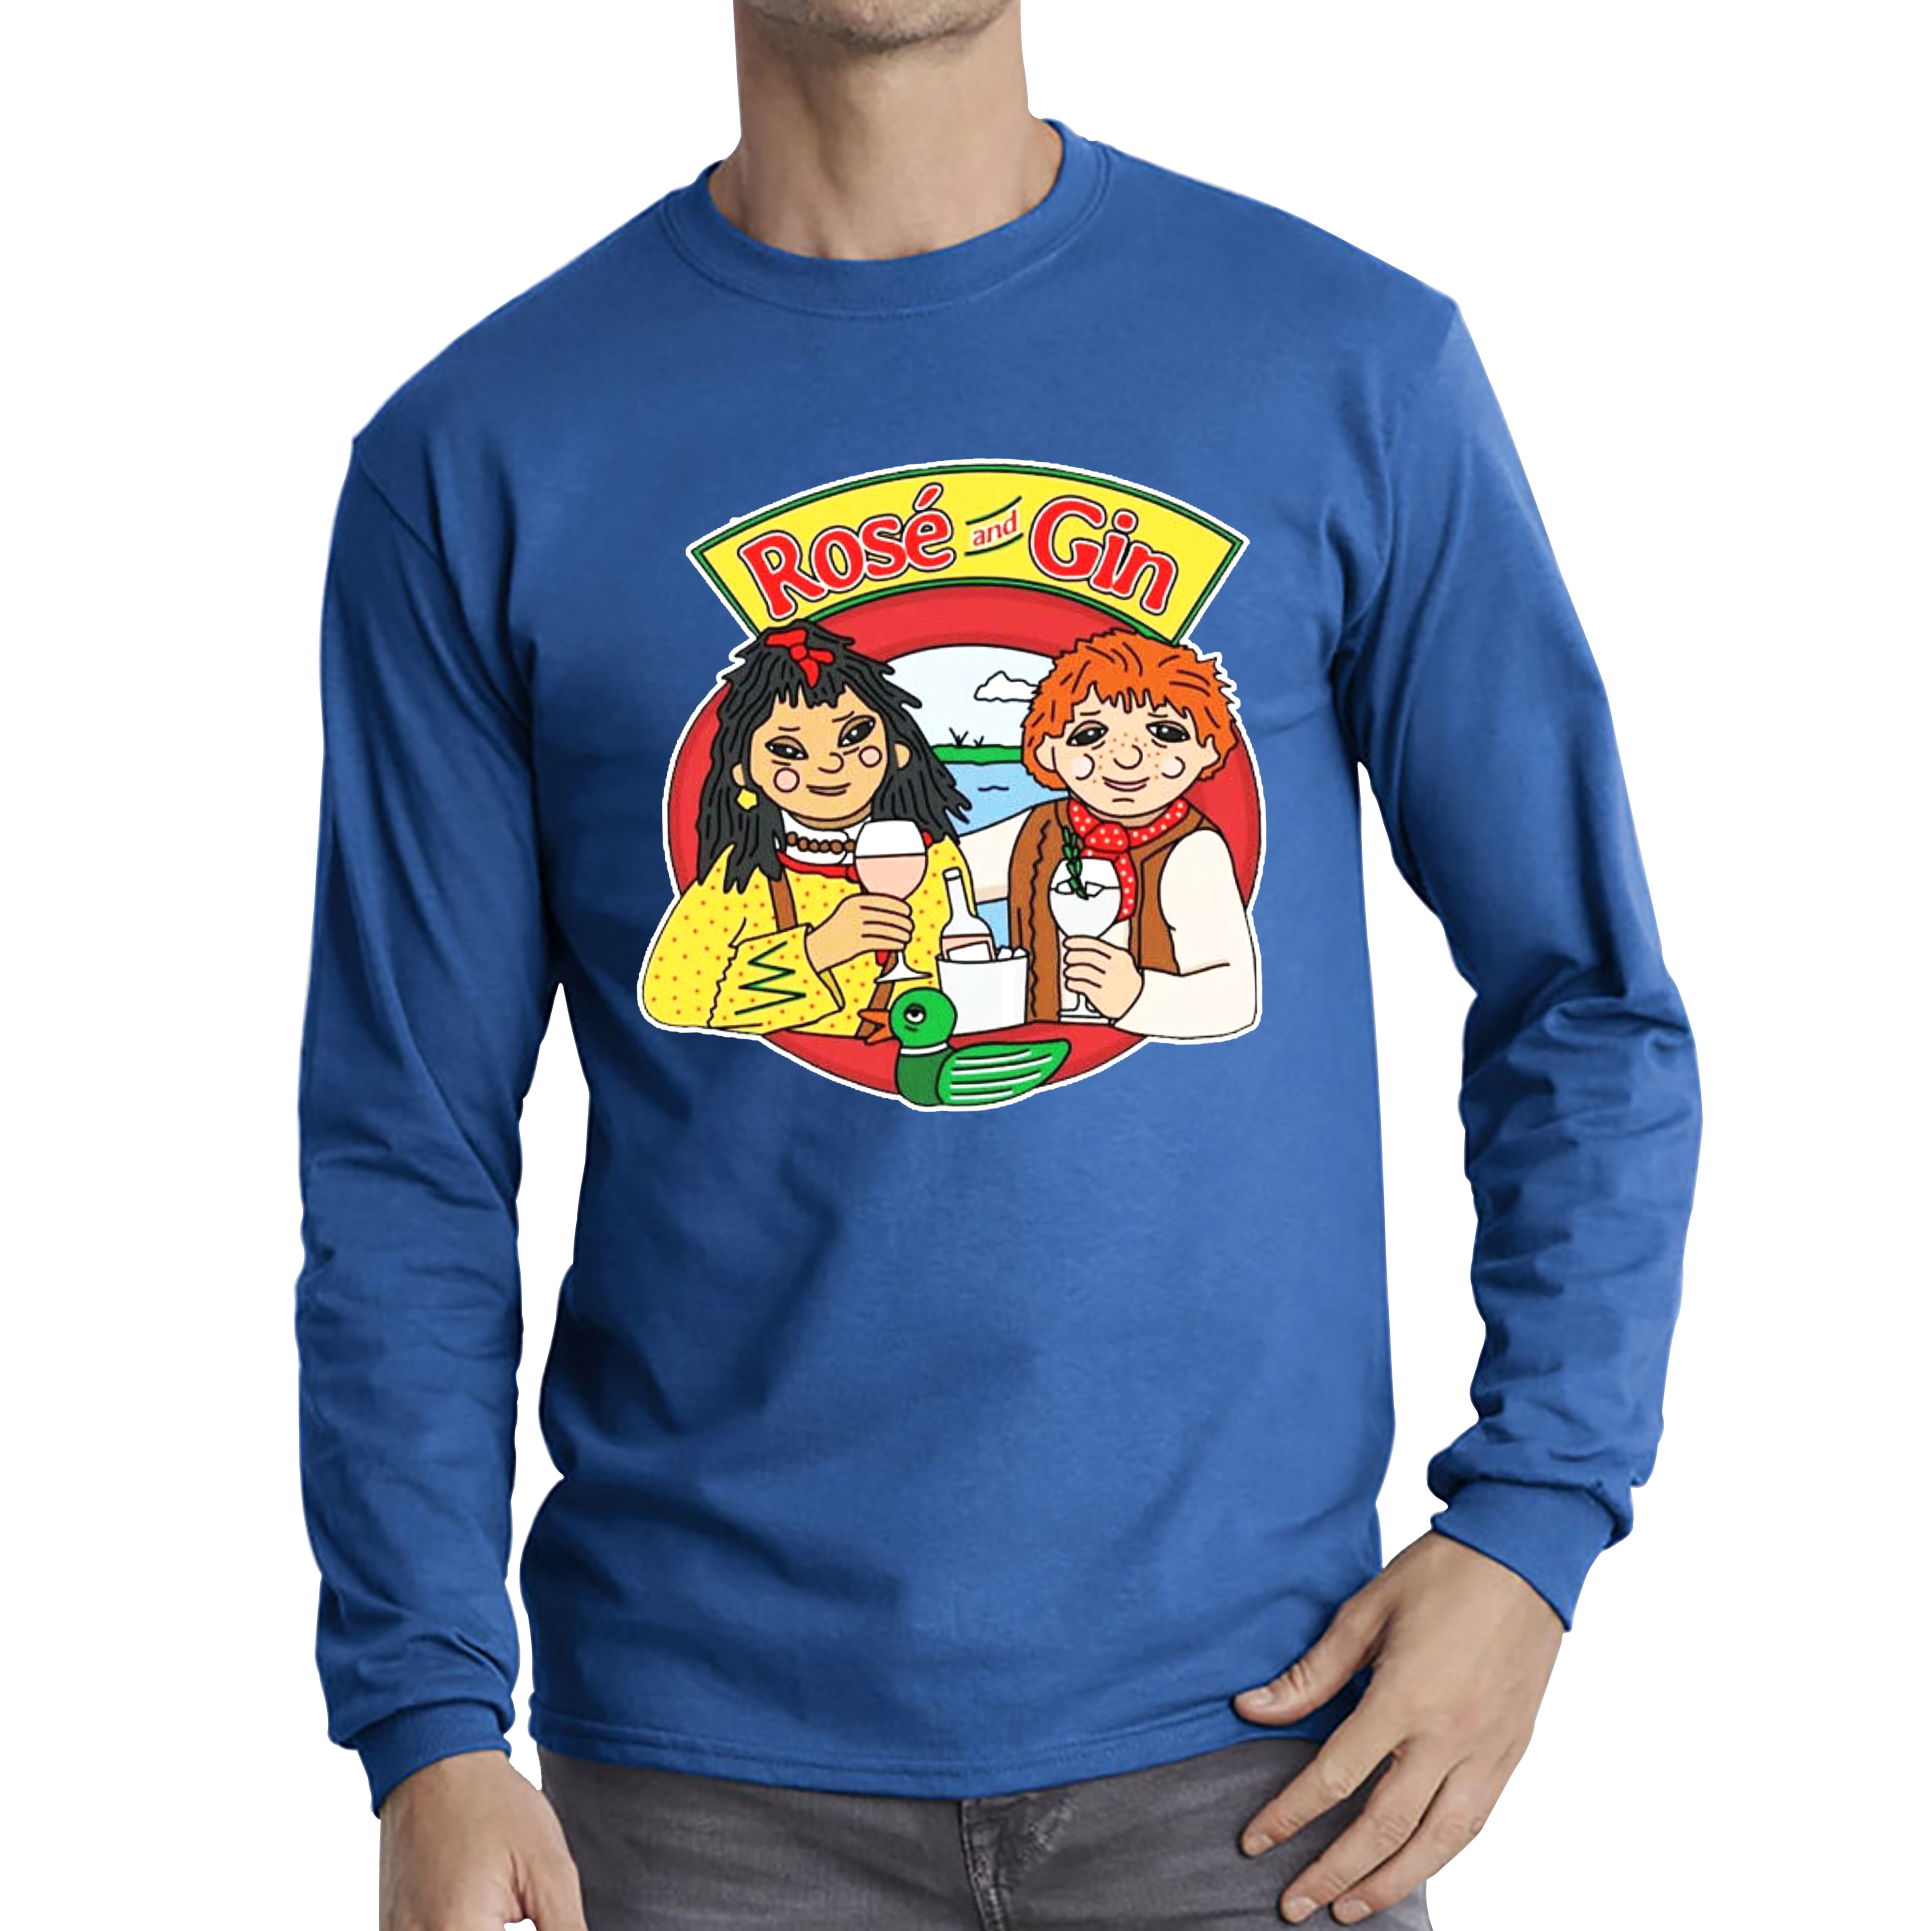 Rosé and Gin Funny 90's TV Show Rosie and Jim Boat Wine Adult Long Sleeve T Shirt